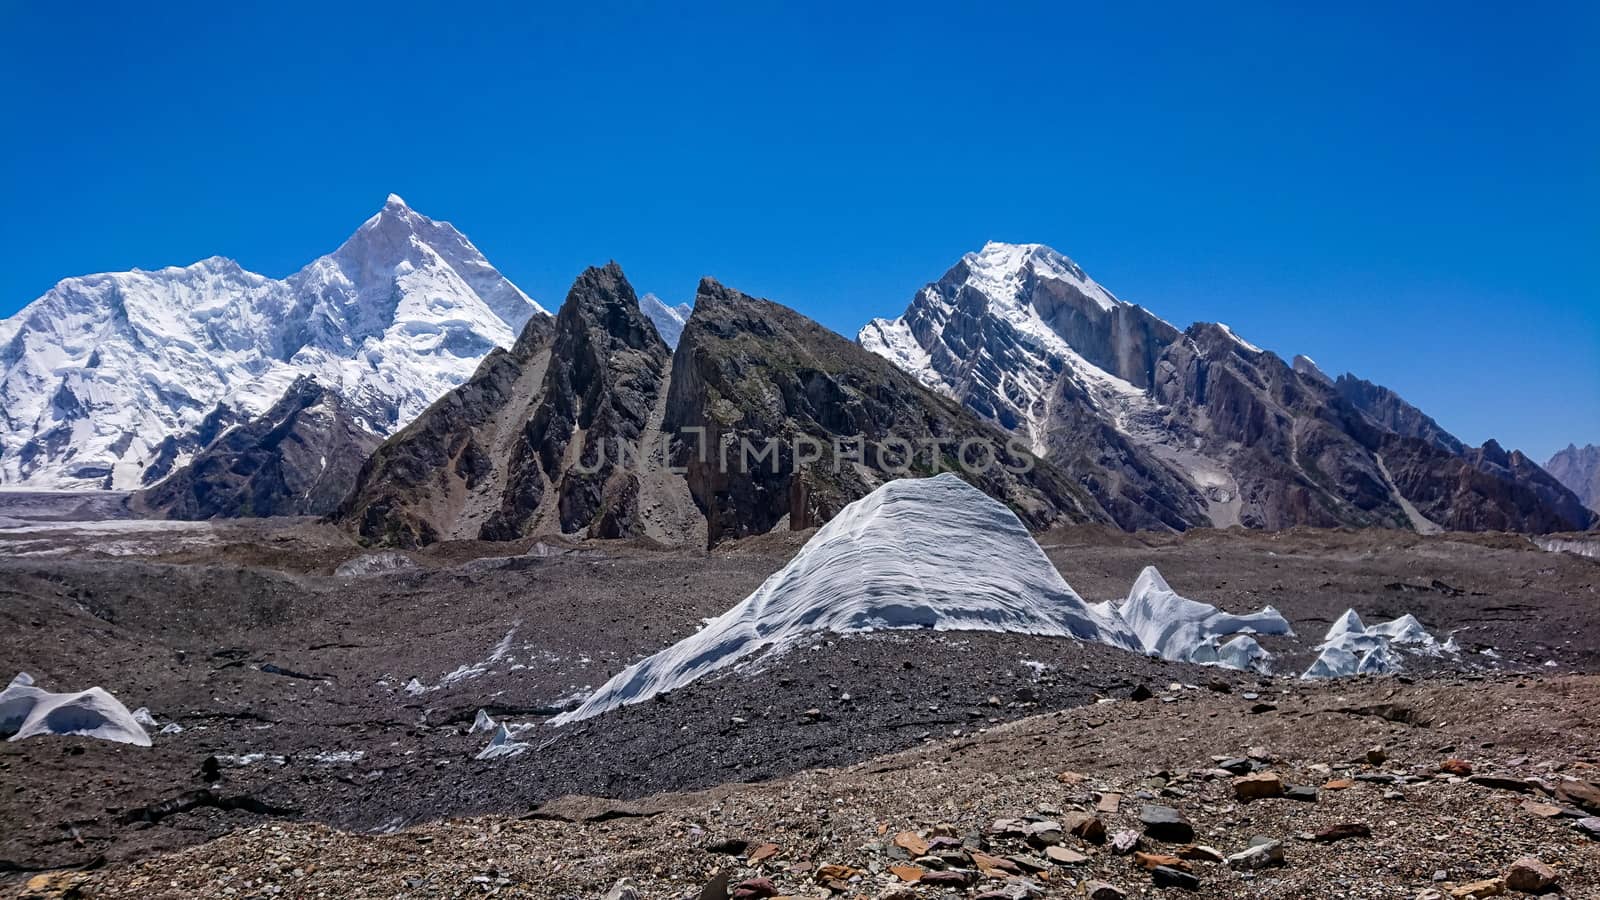 K2 and Broad Peak from Concordia in the Karakorum Mountains Pakistan by Volcanic